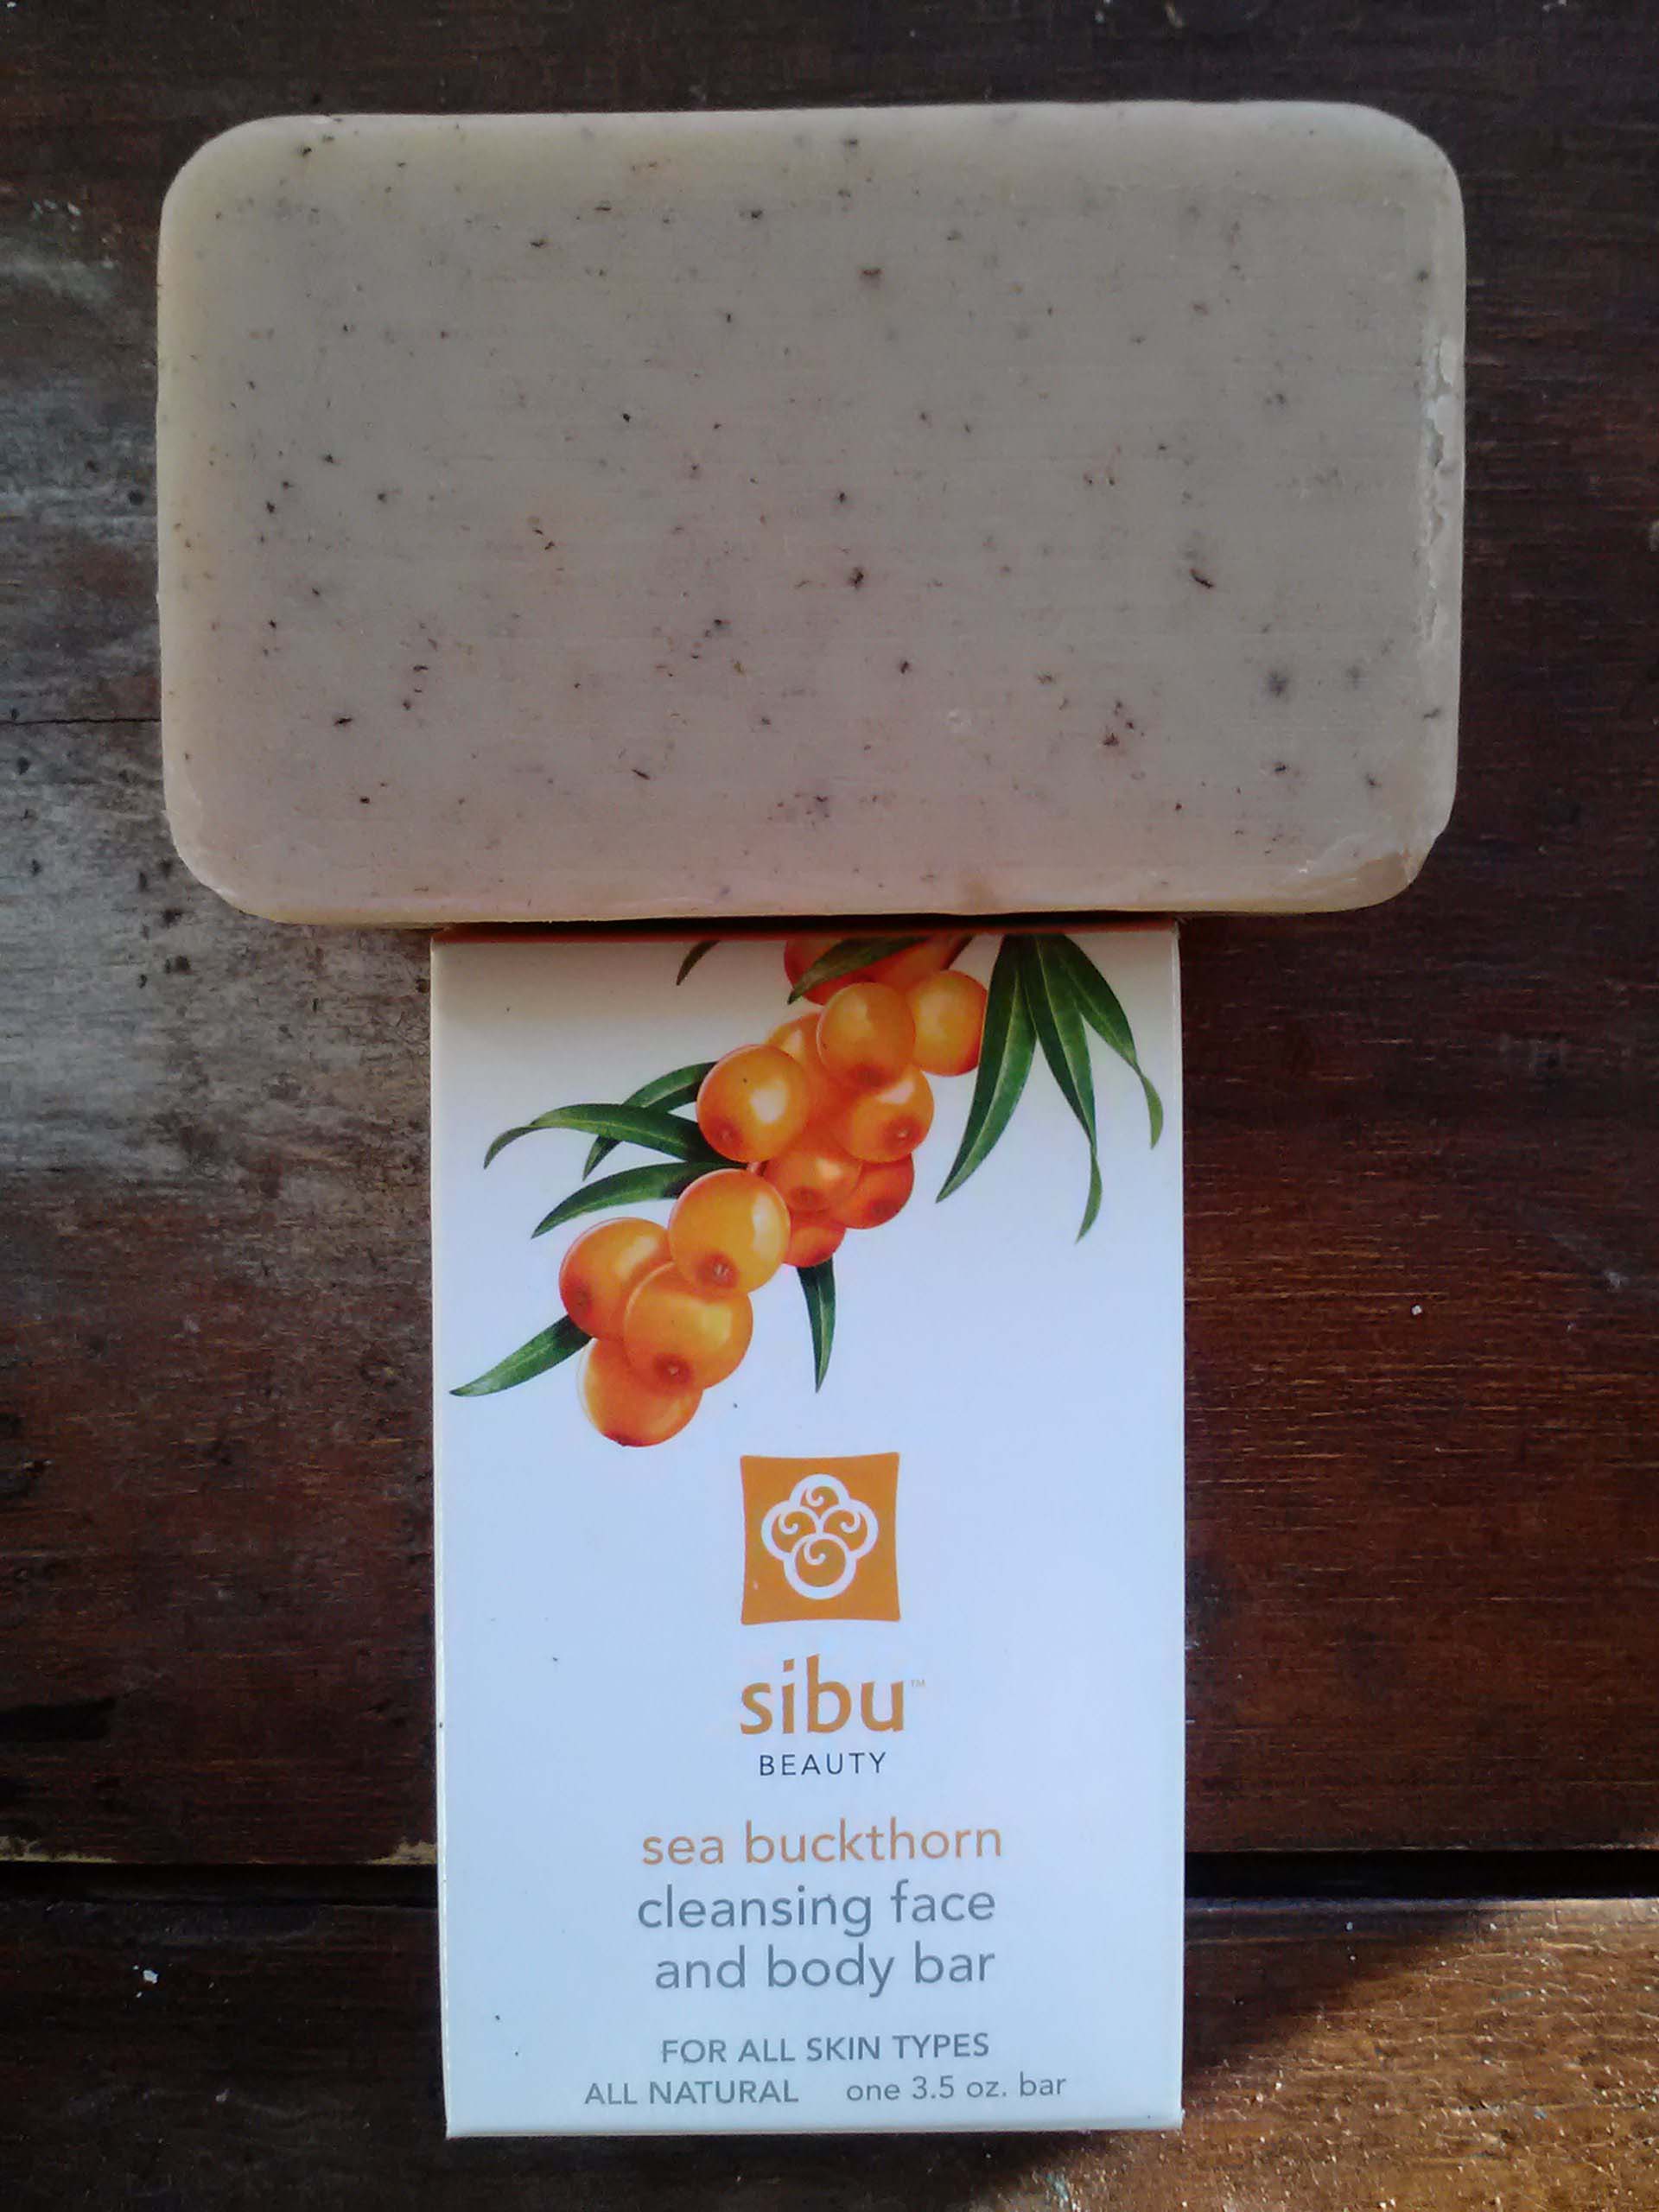 Sibu Beauty Sea Buckthorn Cleansing Face and Body Bar